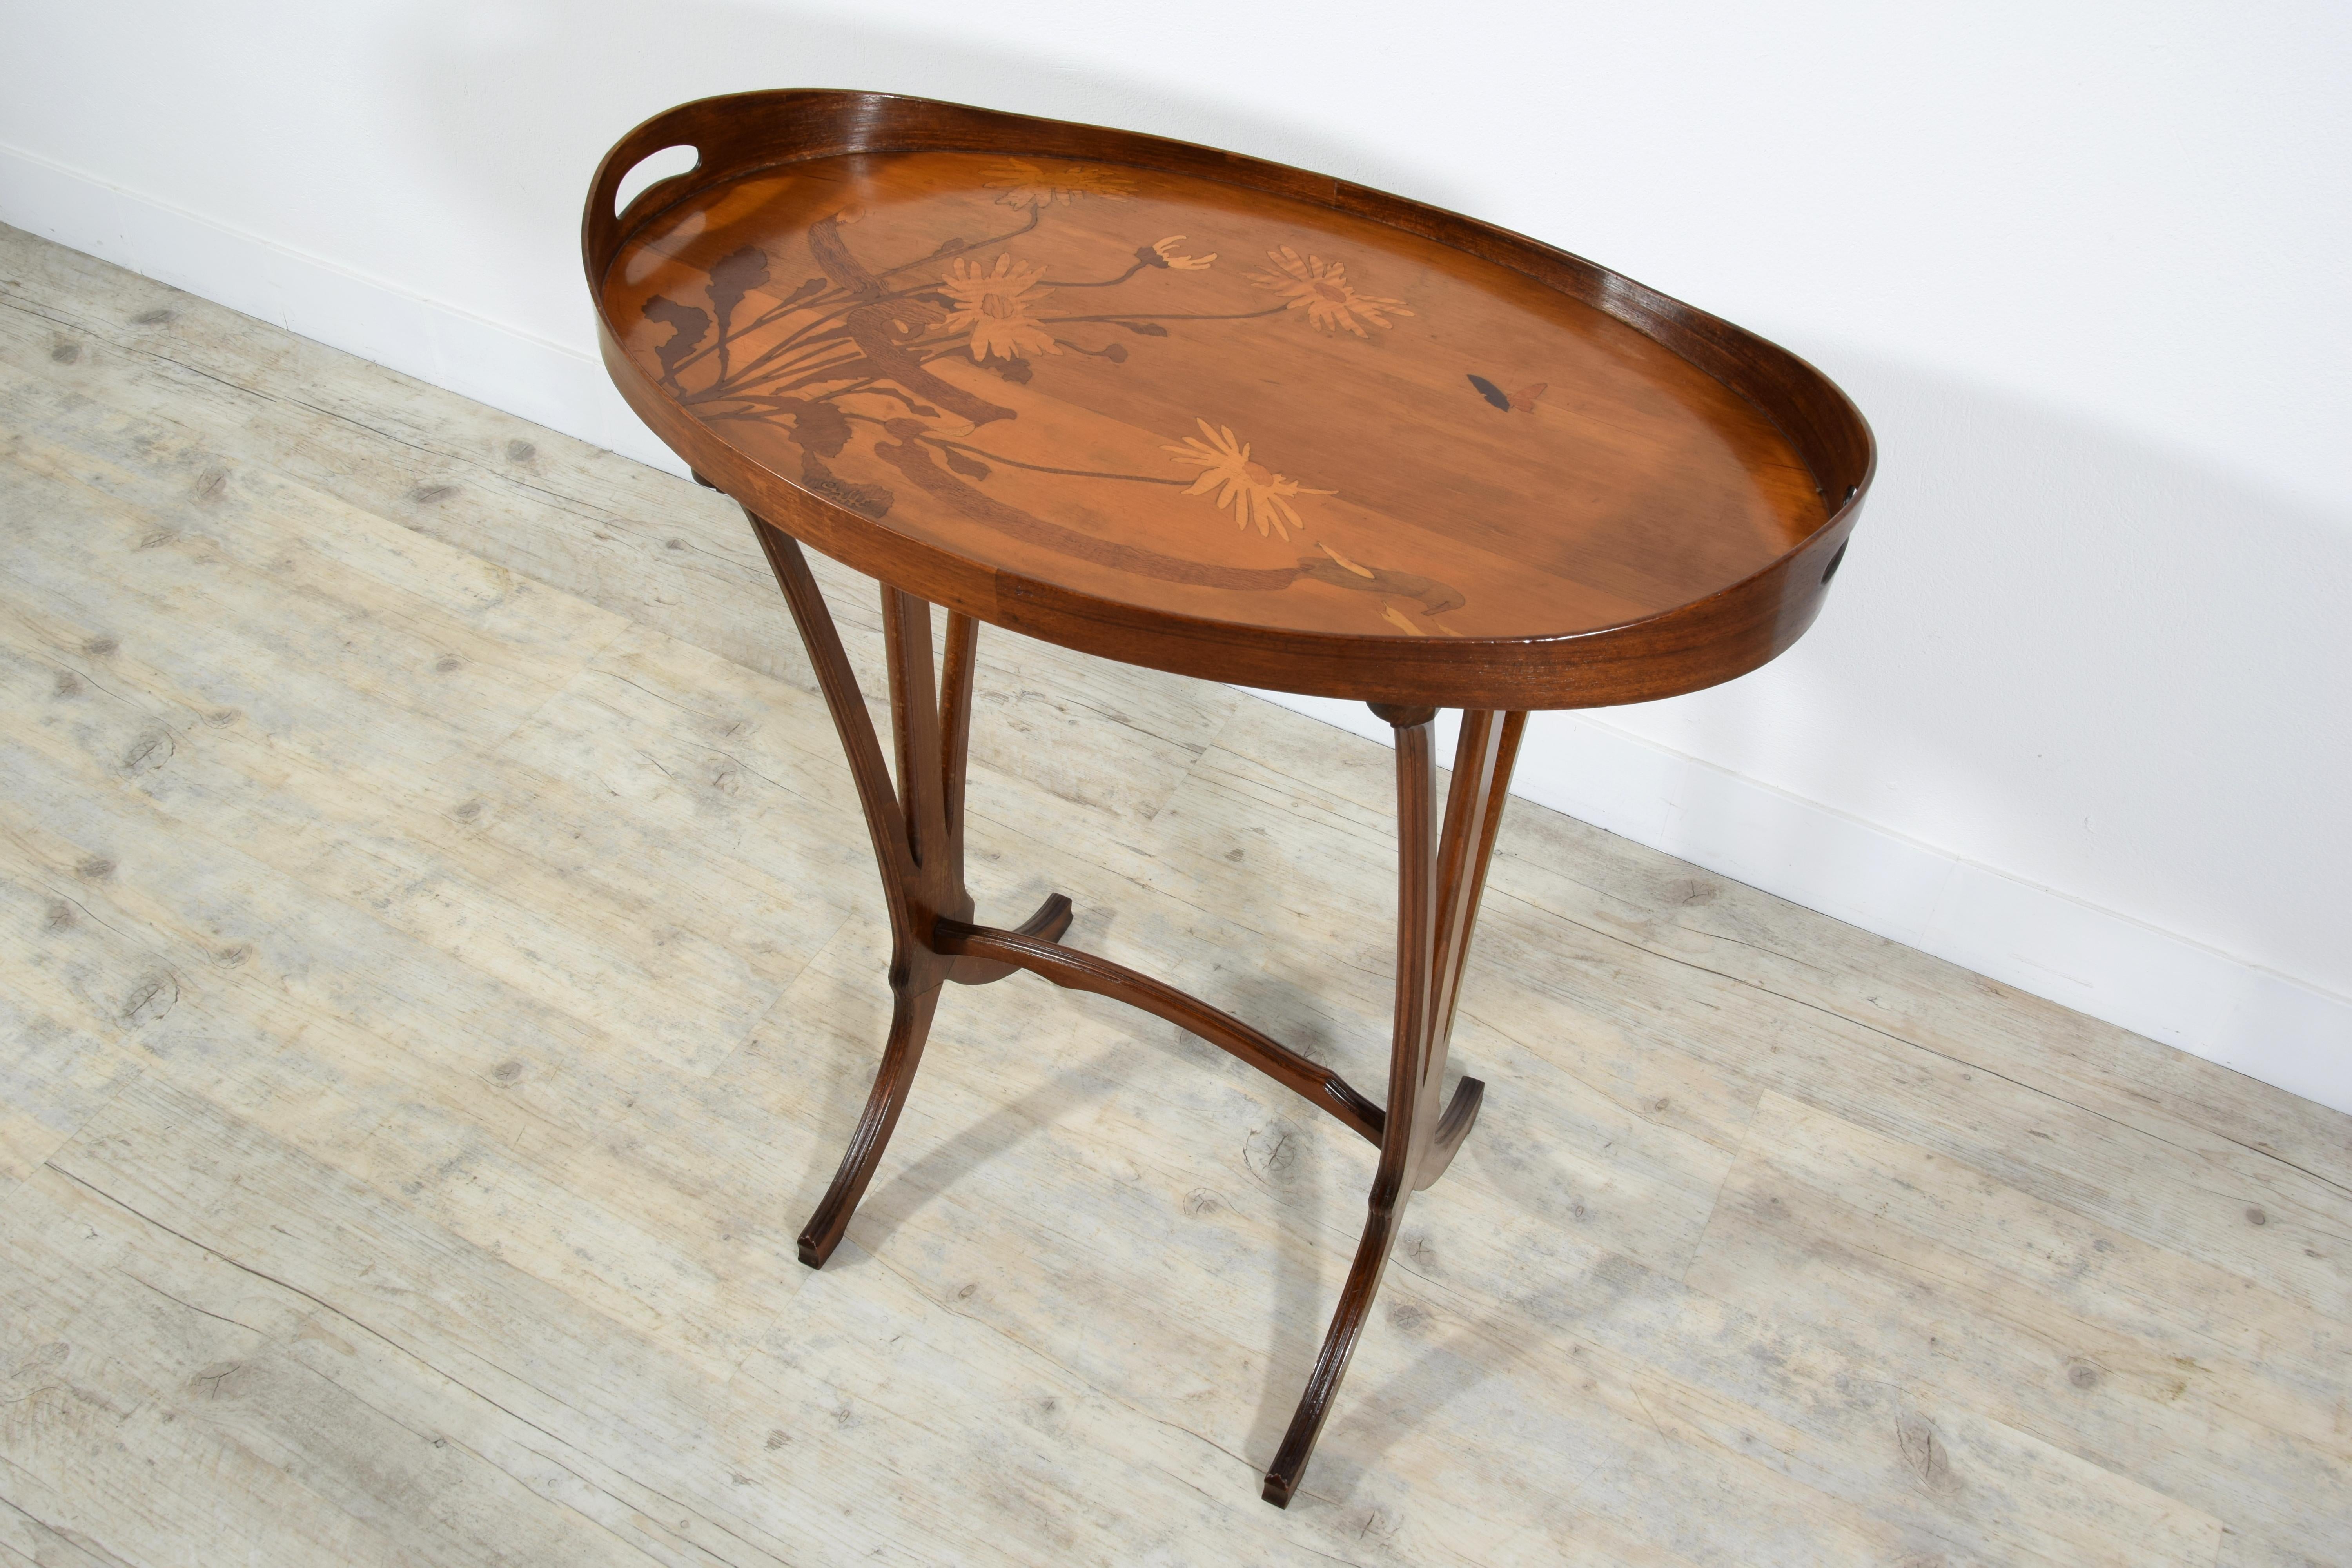 French Inlay Wood Coffee Table by Emile Gallé (1846-1904) For Sale 11